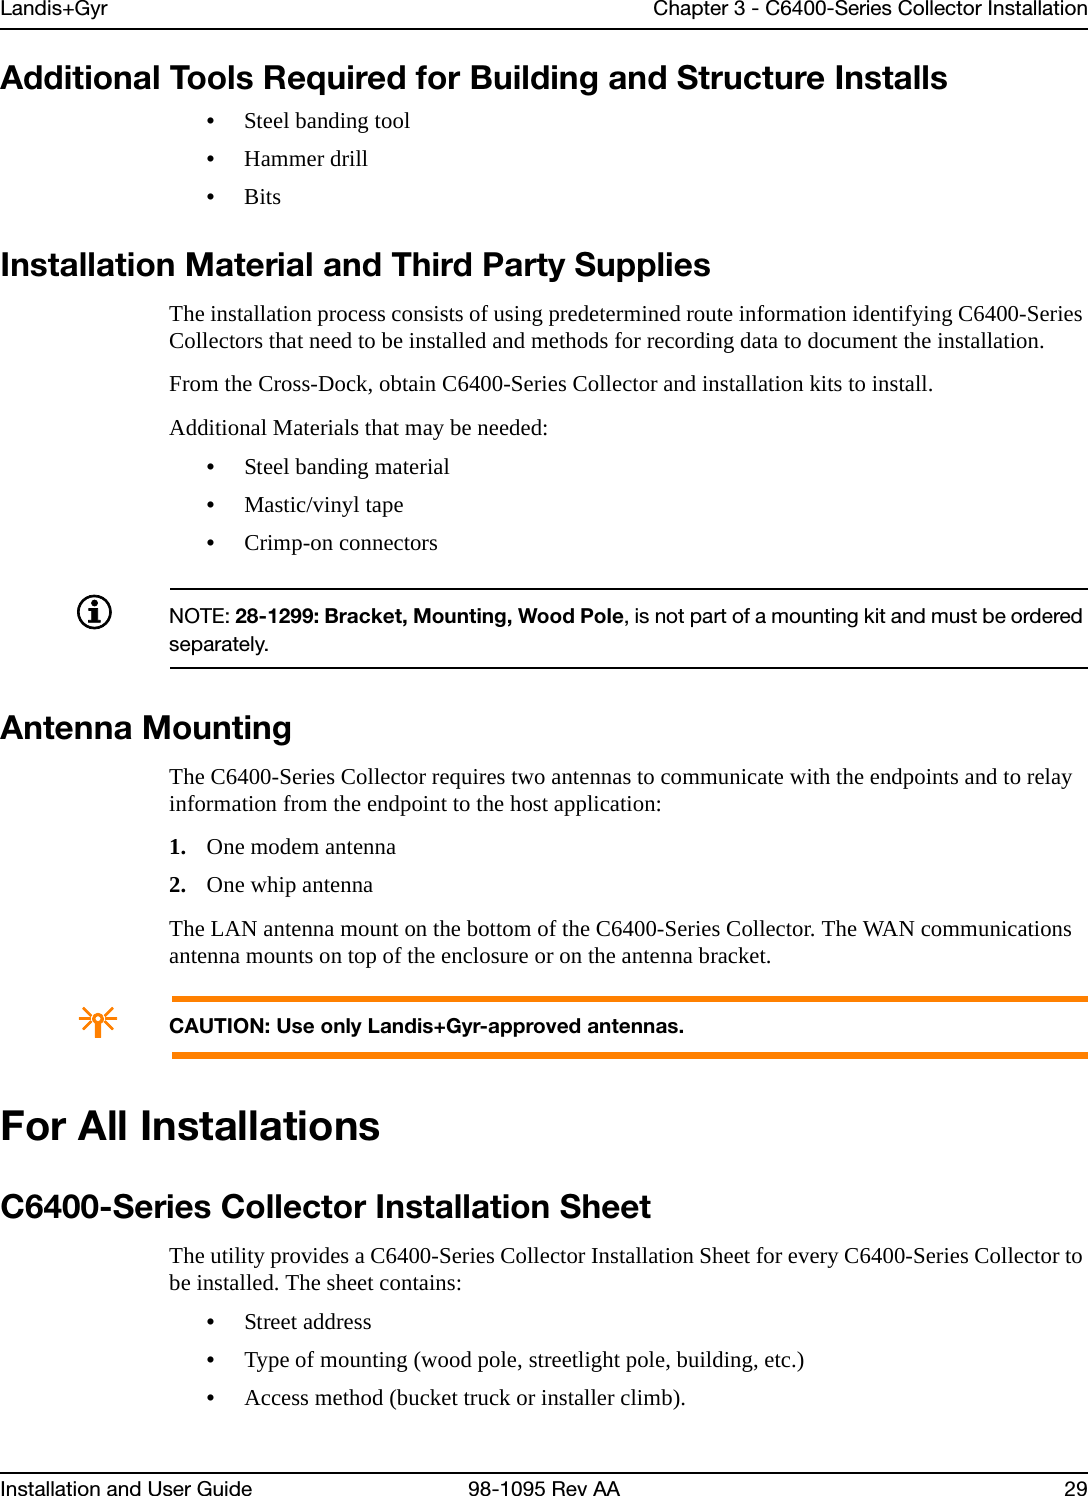 Landis+Gyr Chapter 3 - C6400-Series Collector InstallationInstallation and User Guide 98-1095 Rev AA 29Additional Tools Required for Building and Structure Installs•Steel banding tool•Hammer drill•BitsInstallation Material and Third Party SuppliesThe installation process consists of using predetermined route information identifying C6400-Series Collectors that need to be installed and methods for recording data to document the installation. From the Cross-Dock, obtain C6400-Series Collector and installation kits to install.Additional Materials that may be needed:•Steel banding material•Mastic/vinyl tape•Crimp-on connectorsNOTE: 28-1299: Bracket, Mounting, Wood Pole, is not part of a mounting kit and must be ordered separately.Antenna MountingThe C6400-Series Collector requires two antennas to communicate with the endpoints and to relay information from the endpoint to the host application:1. One modem antenna2. One whip antennaThe LAN antenna mount on the bottom of the C6400-Series Collector. The WAN communications antenna mounts on top of the enclosure or on the antenna bracket.ACAUTION: Use only Landis+Gyr-approved antennas.For All InstallationsC6400-Series Collector Installation SheetThe utility provides a C6400-Series Collector Installation Sheet for every C6400-Series Collector to be installed. The sheet contains:•Street address•Type of mounting (wood pole, streetlight pole, building, etc.)•Access method (bucket truck or installer climb).